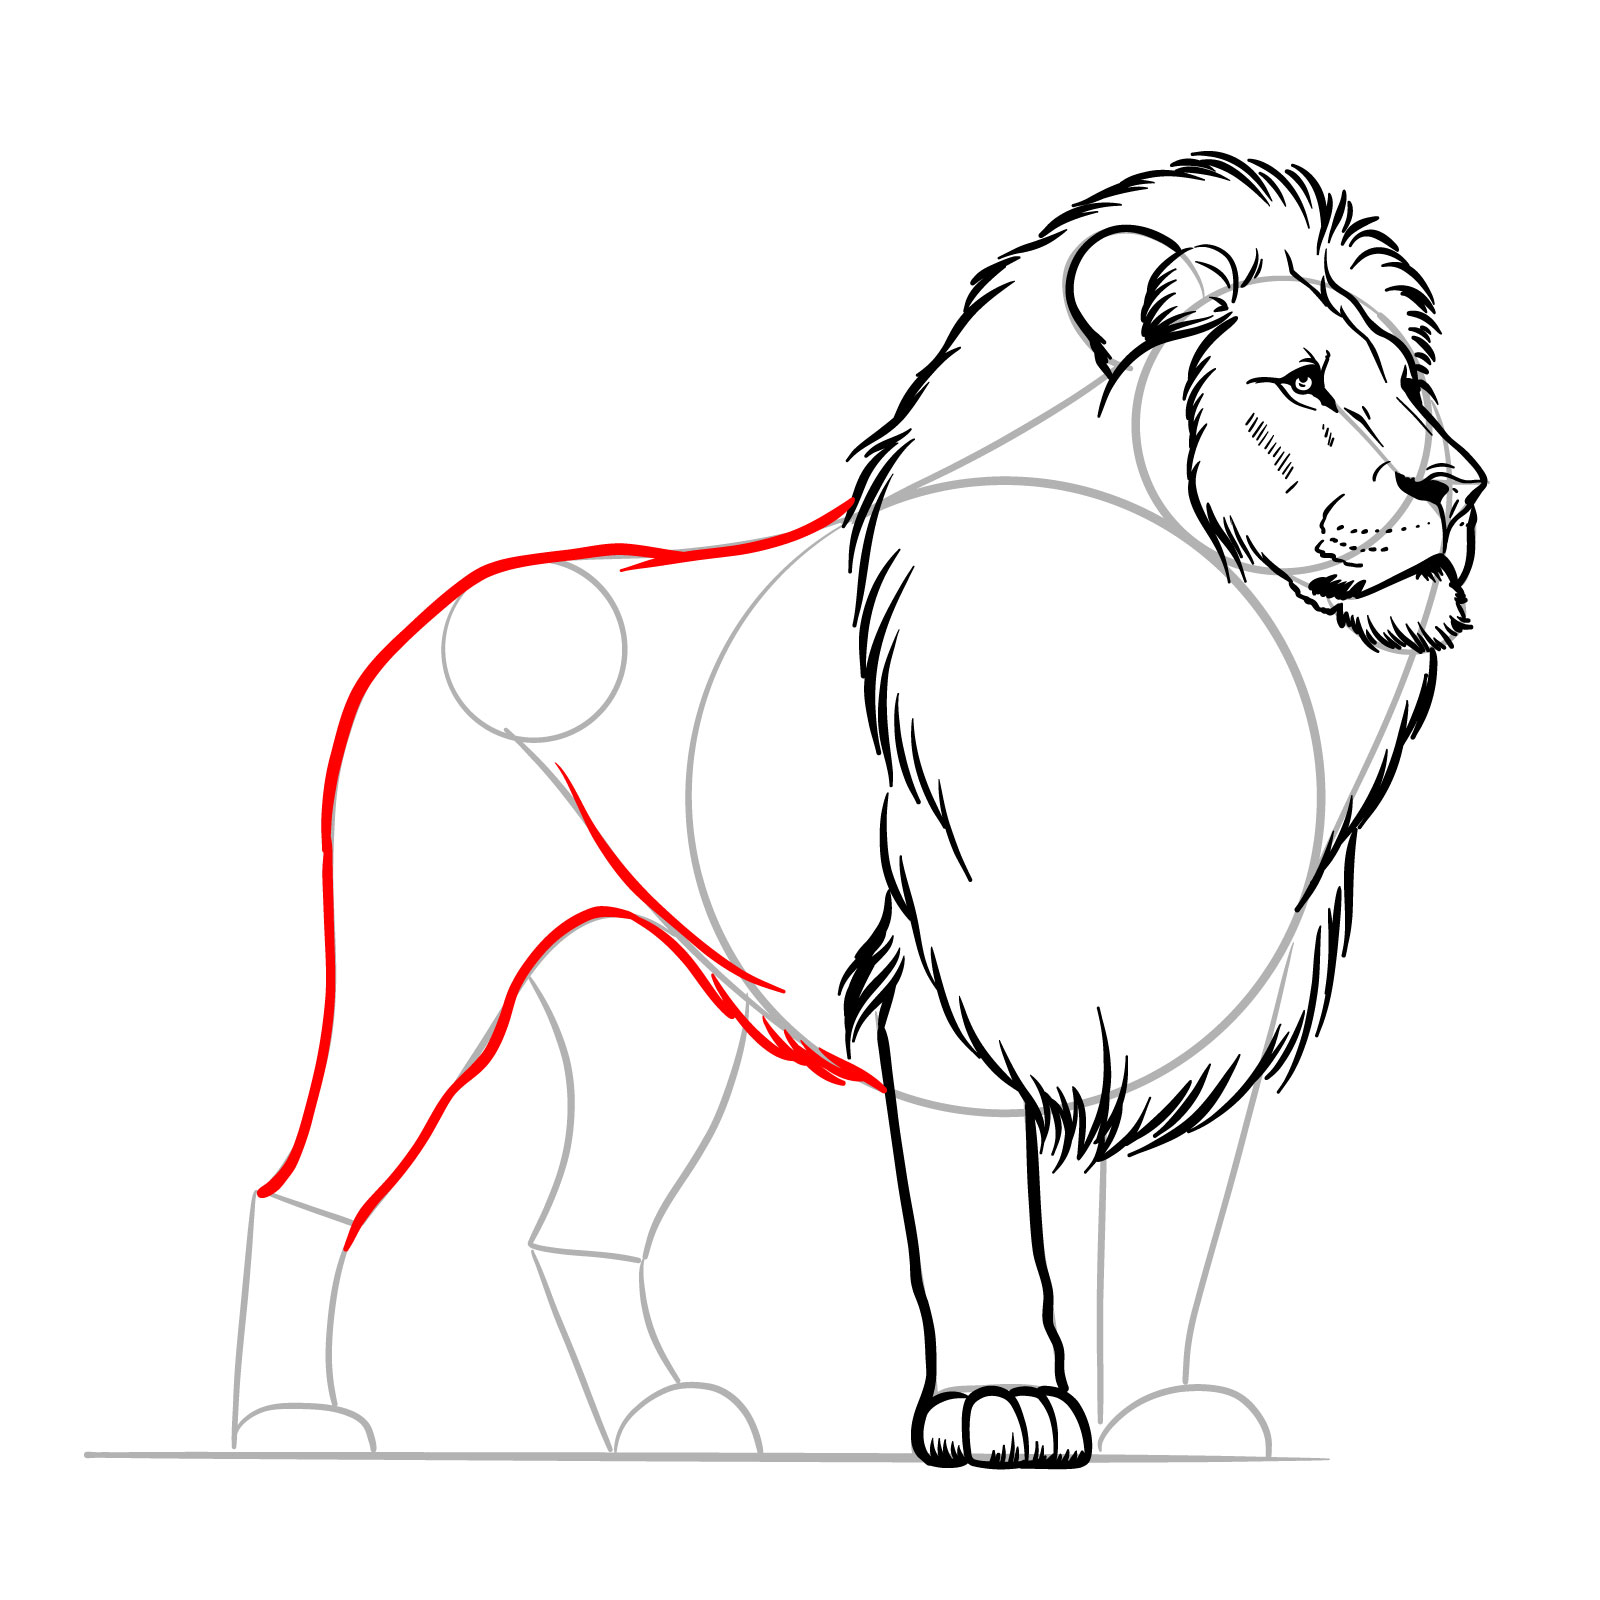 Body and rear leg shaping in a standing lion sketch - step 10